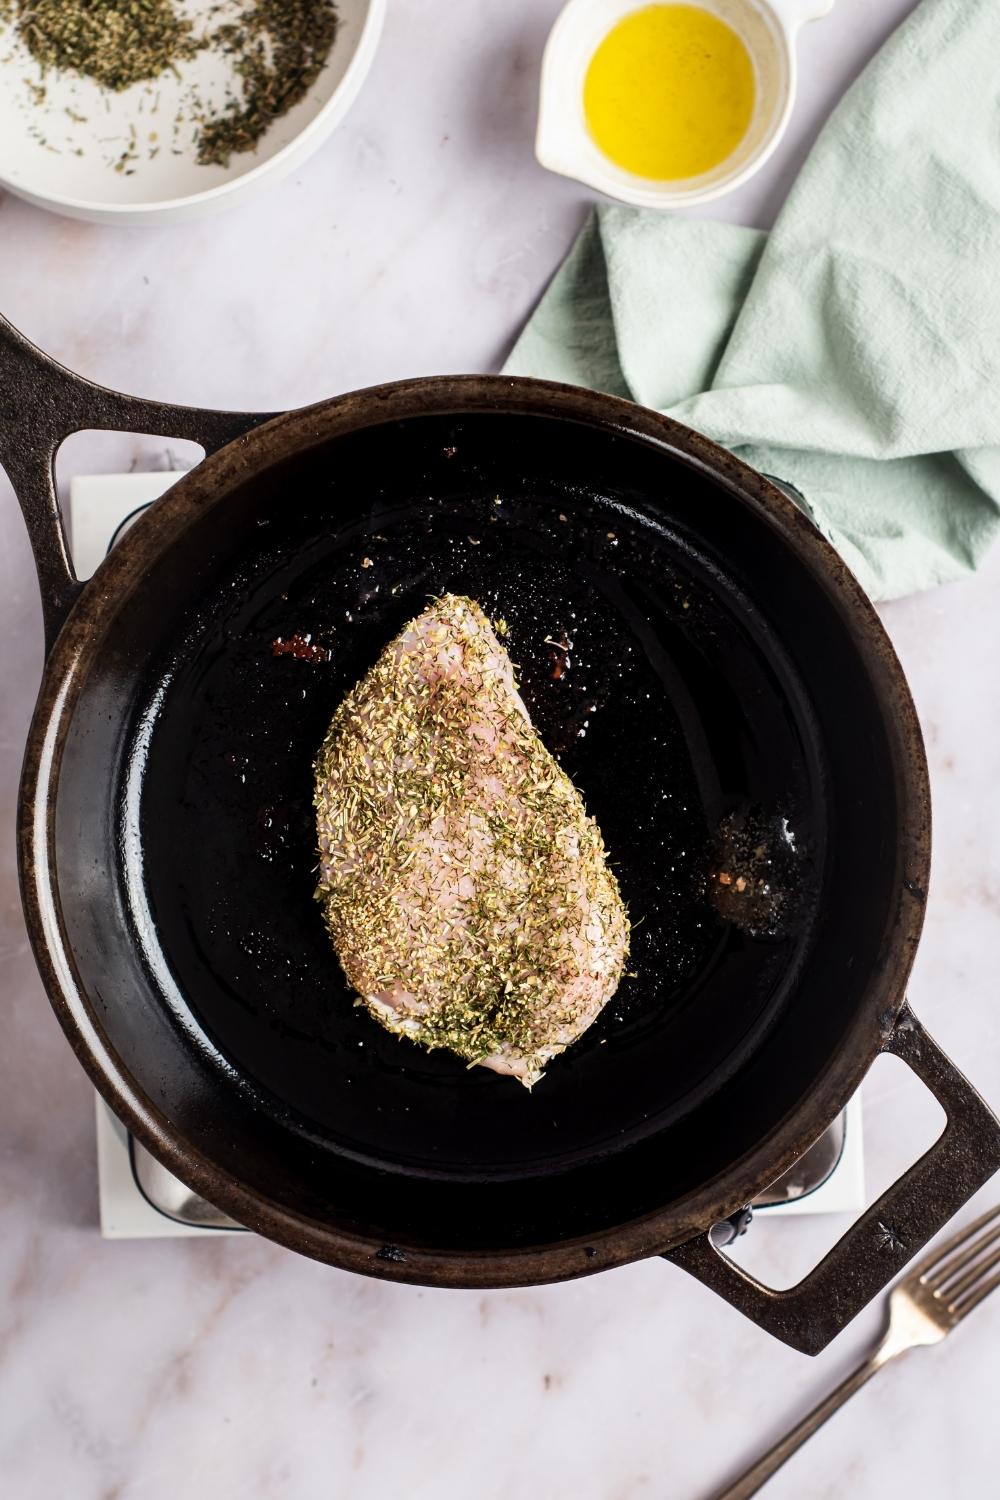 A piece of herb crusted chicken in a skillet.